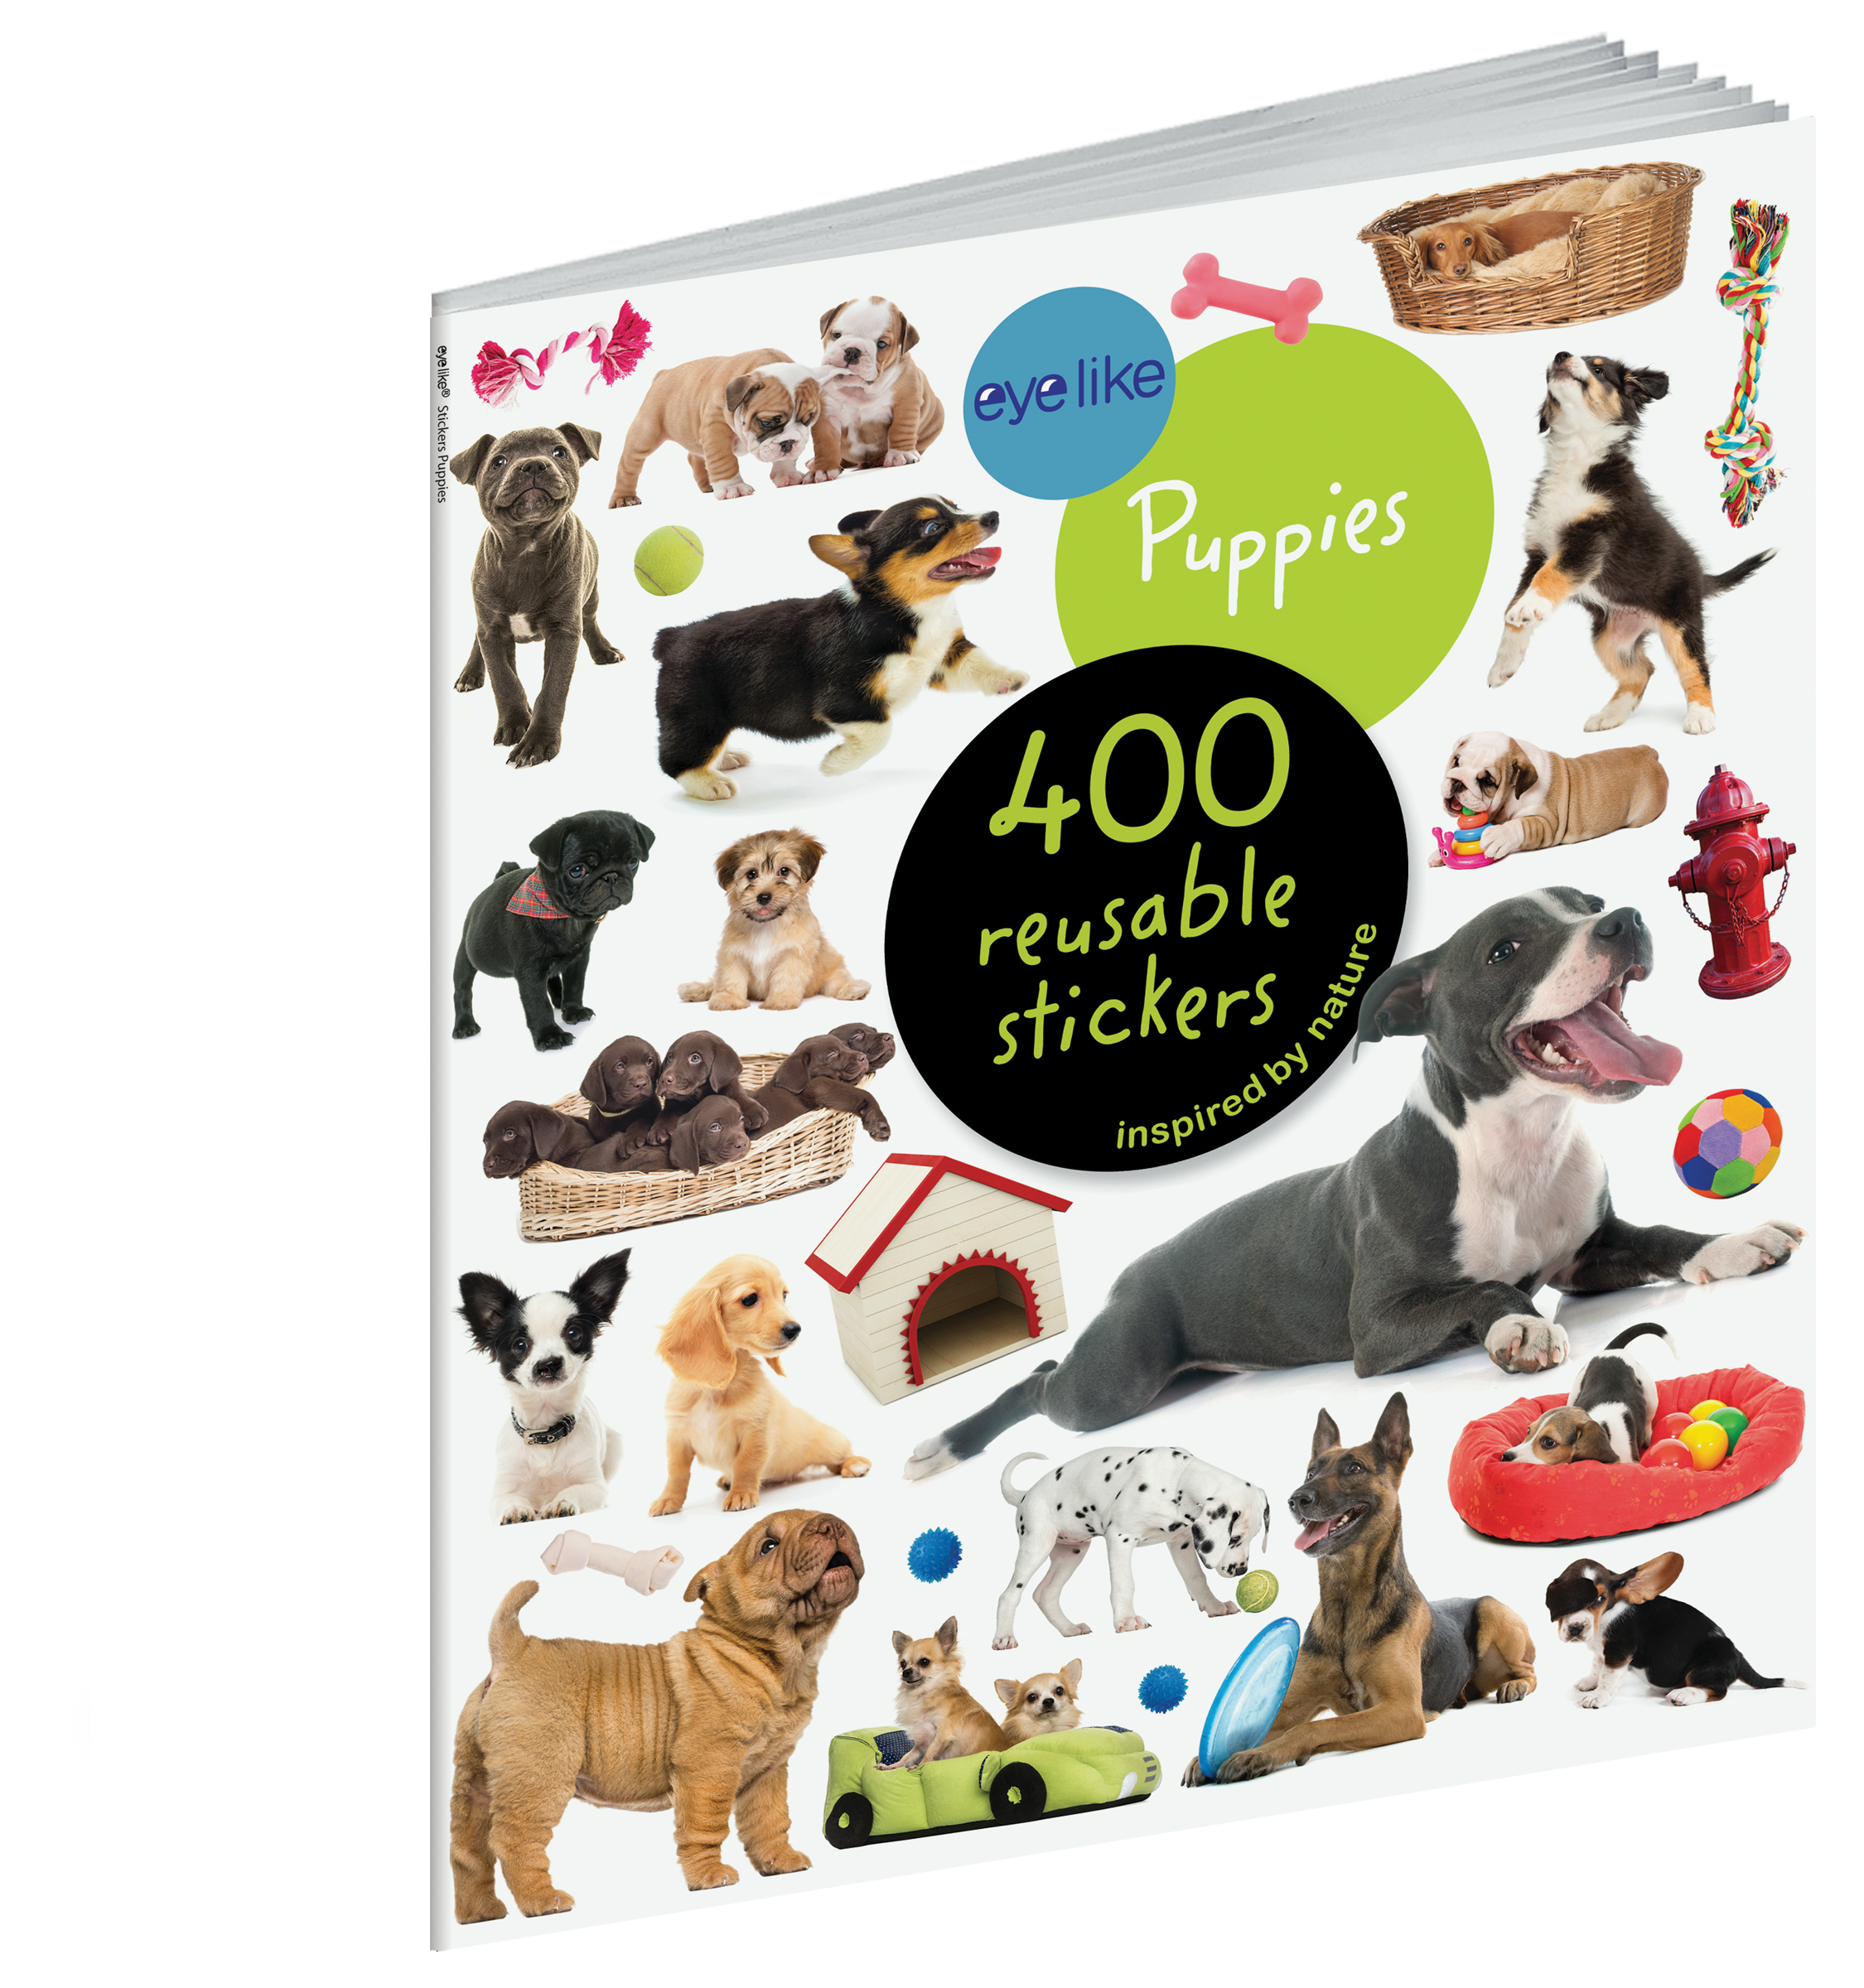 Puppies Eyelike Reusable Stickers